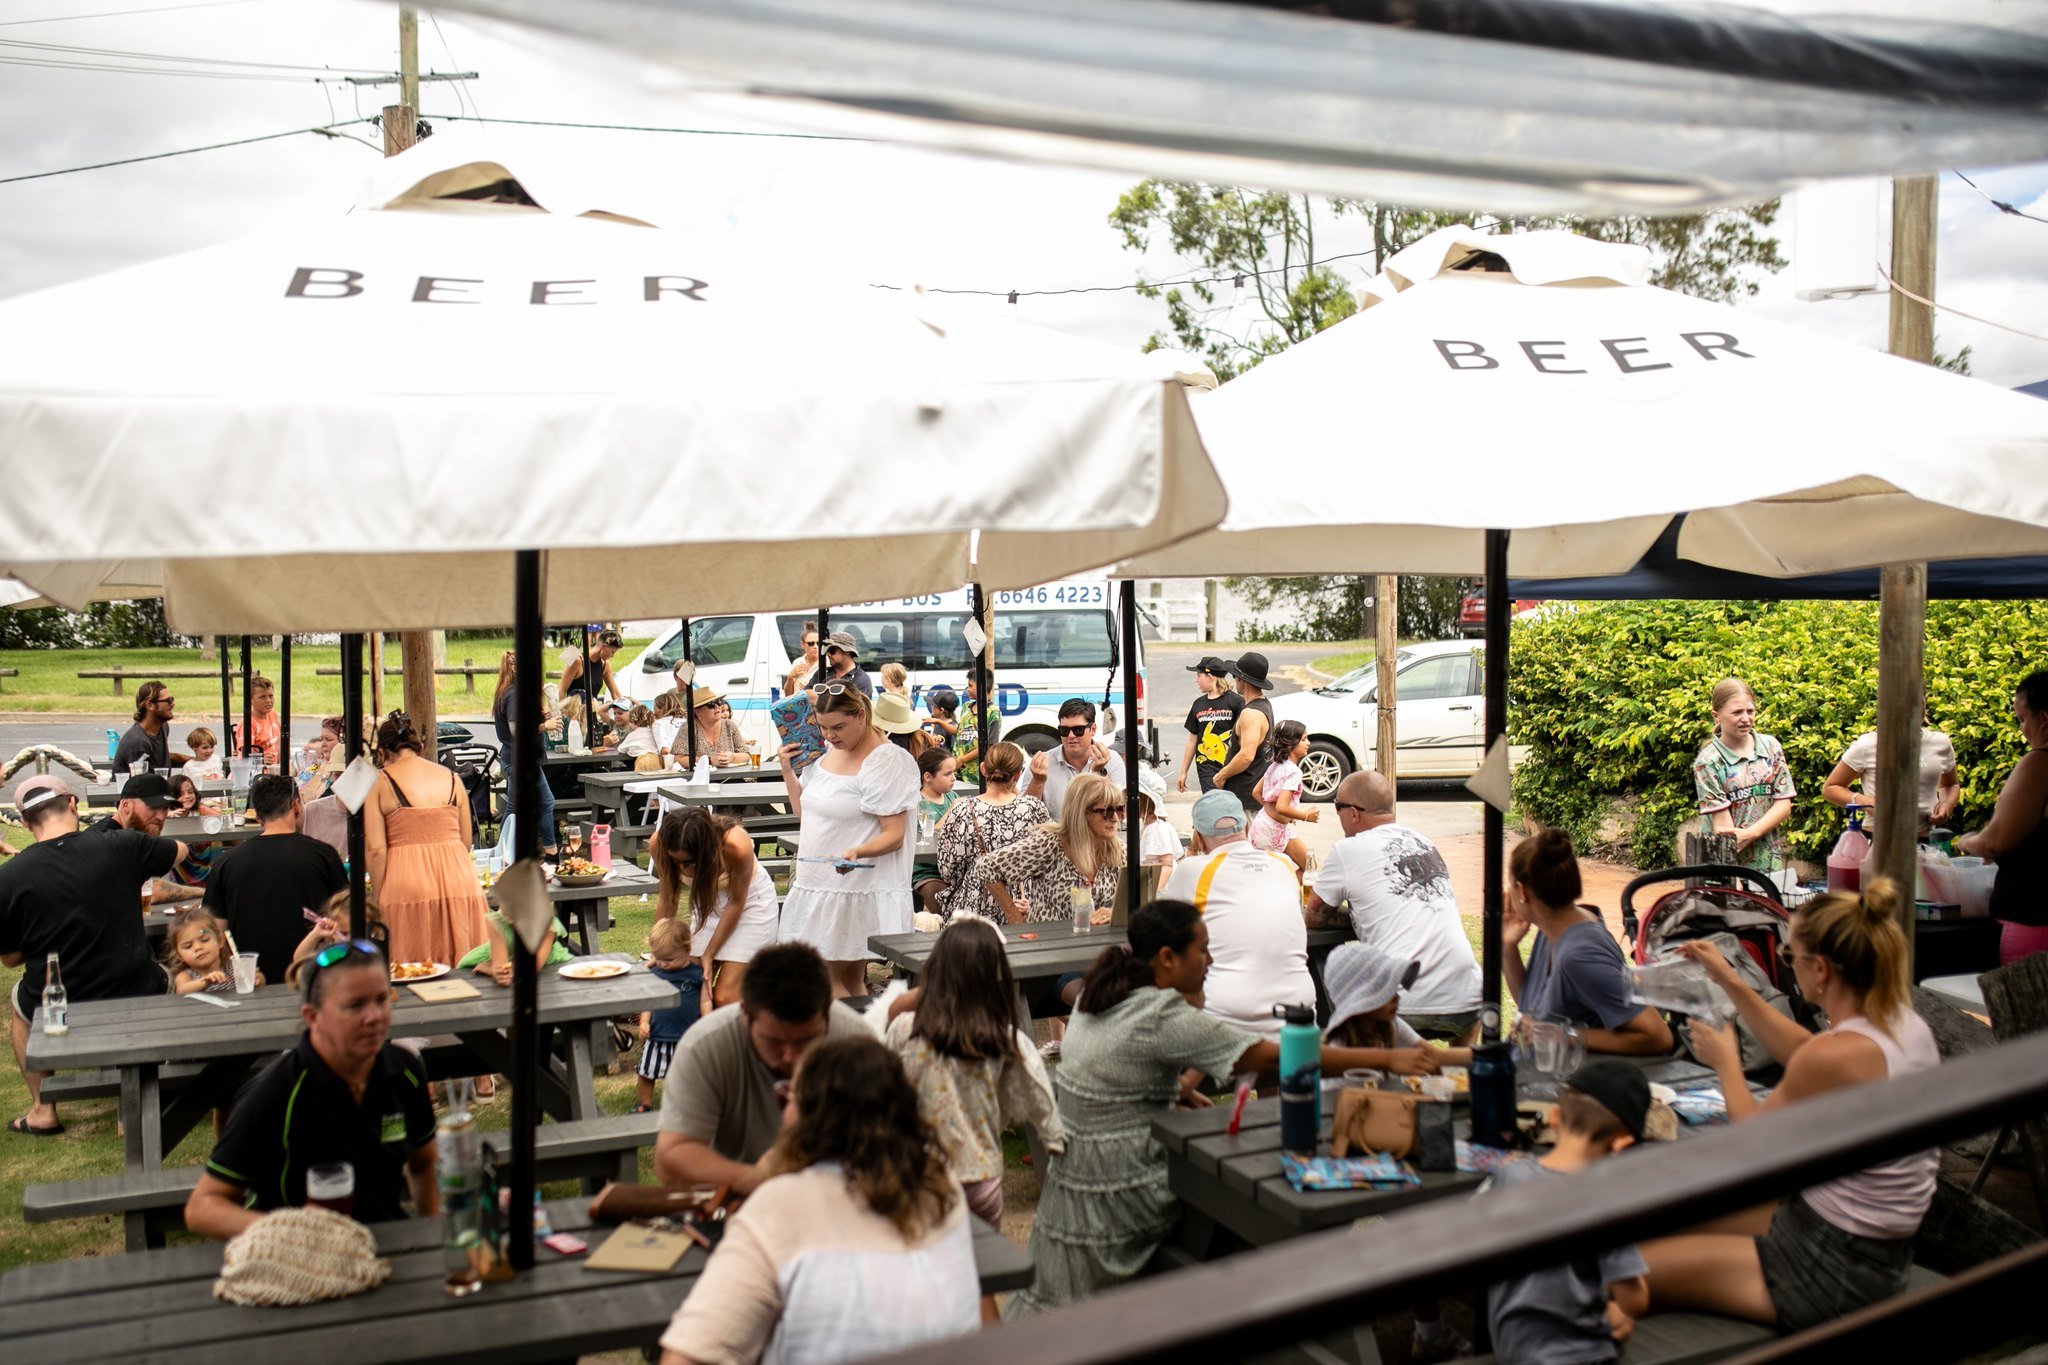 Sunday afternoon in the sun?

See you soon!

#HarwoodHotel #VisitNSW #CountryPub